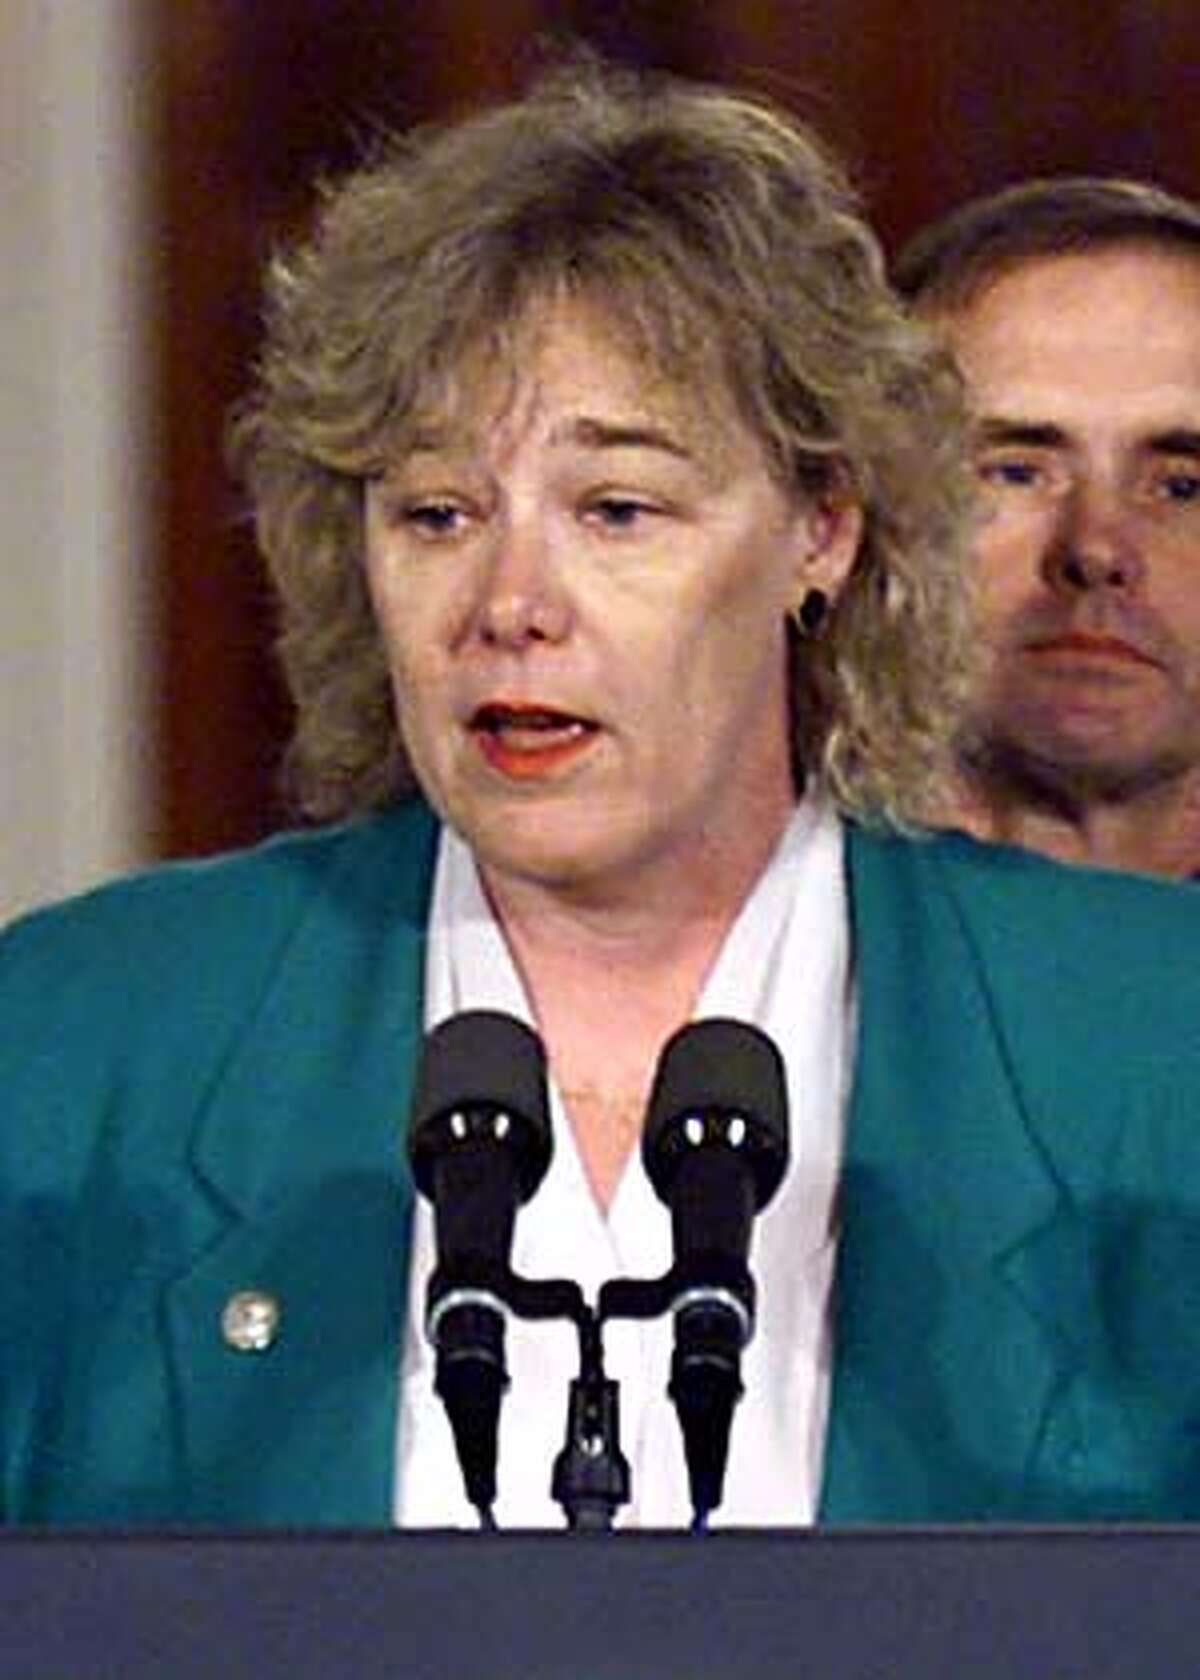 ** FILE ** Rep. Zoe Lofgren, D-CA, speaks as President Clinton and a bipartisan Congressional delegation gathered in the White House East Room to plea for legislators to resume gun safety talks on Capitol Hill, in this March 15, 2000 file photo. Susan Lindauer, 41, who worked for Lofgren in 2002, was arrested was arrested Thursday. march 11, 2004 on charges that she served as a paid agent for the Iraqi intelligence service before and after the U.S. invasion last year. (AP Photo/J. Scott Applewhite)